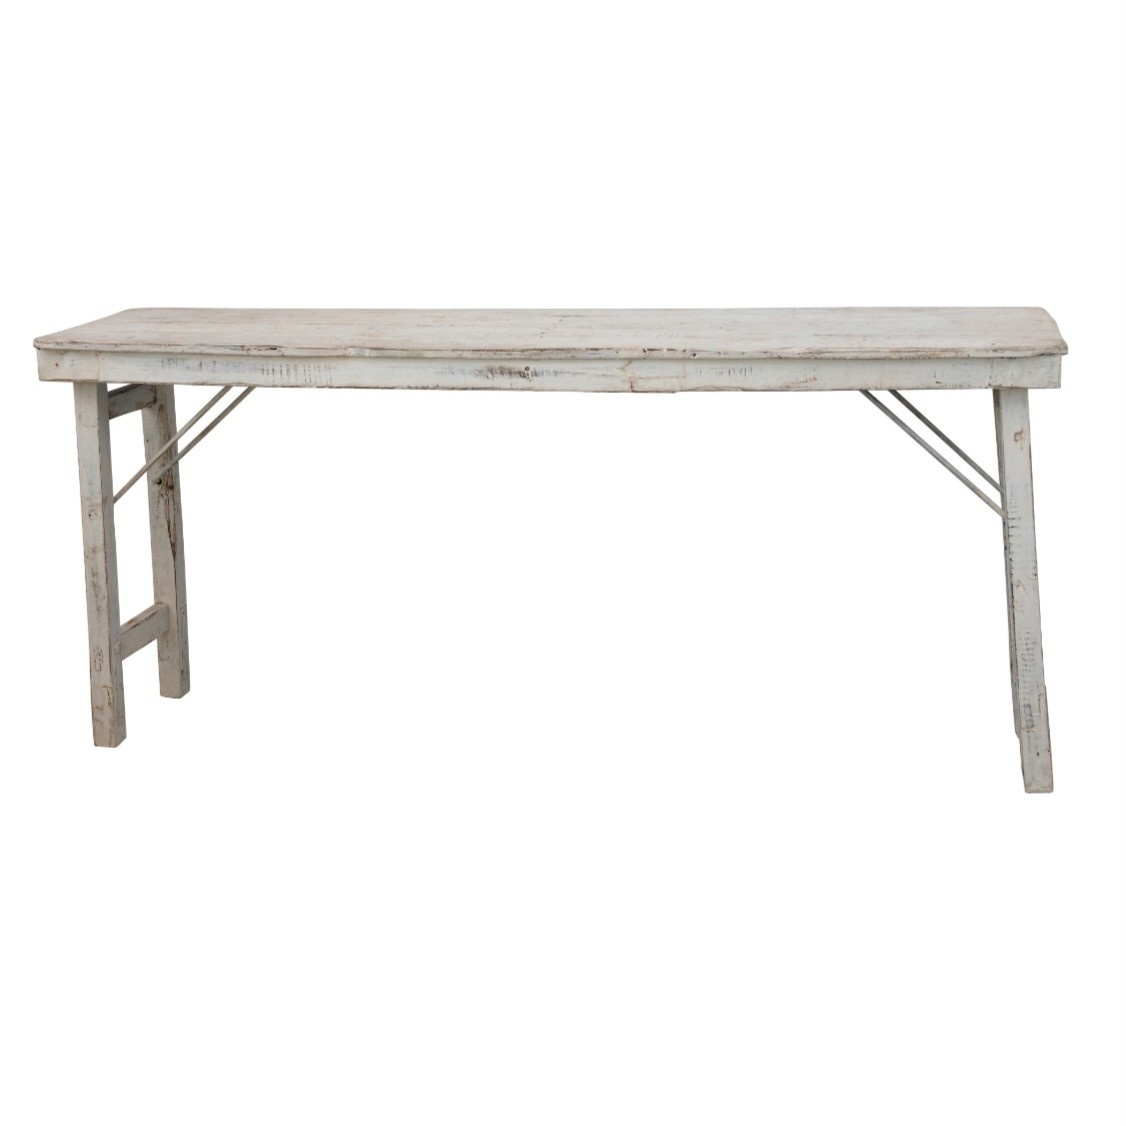 Reclaimed Wood Folding Table, Whitewashed, Available for local pick up